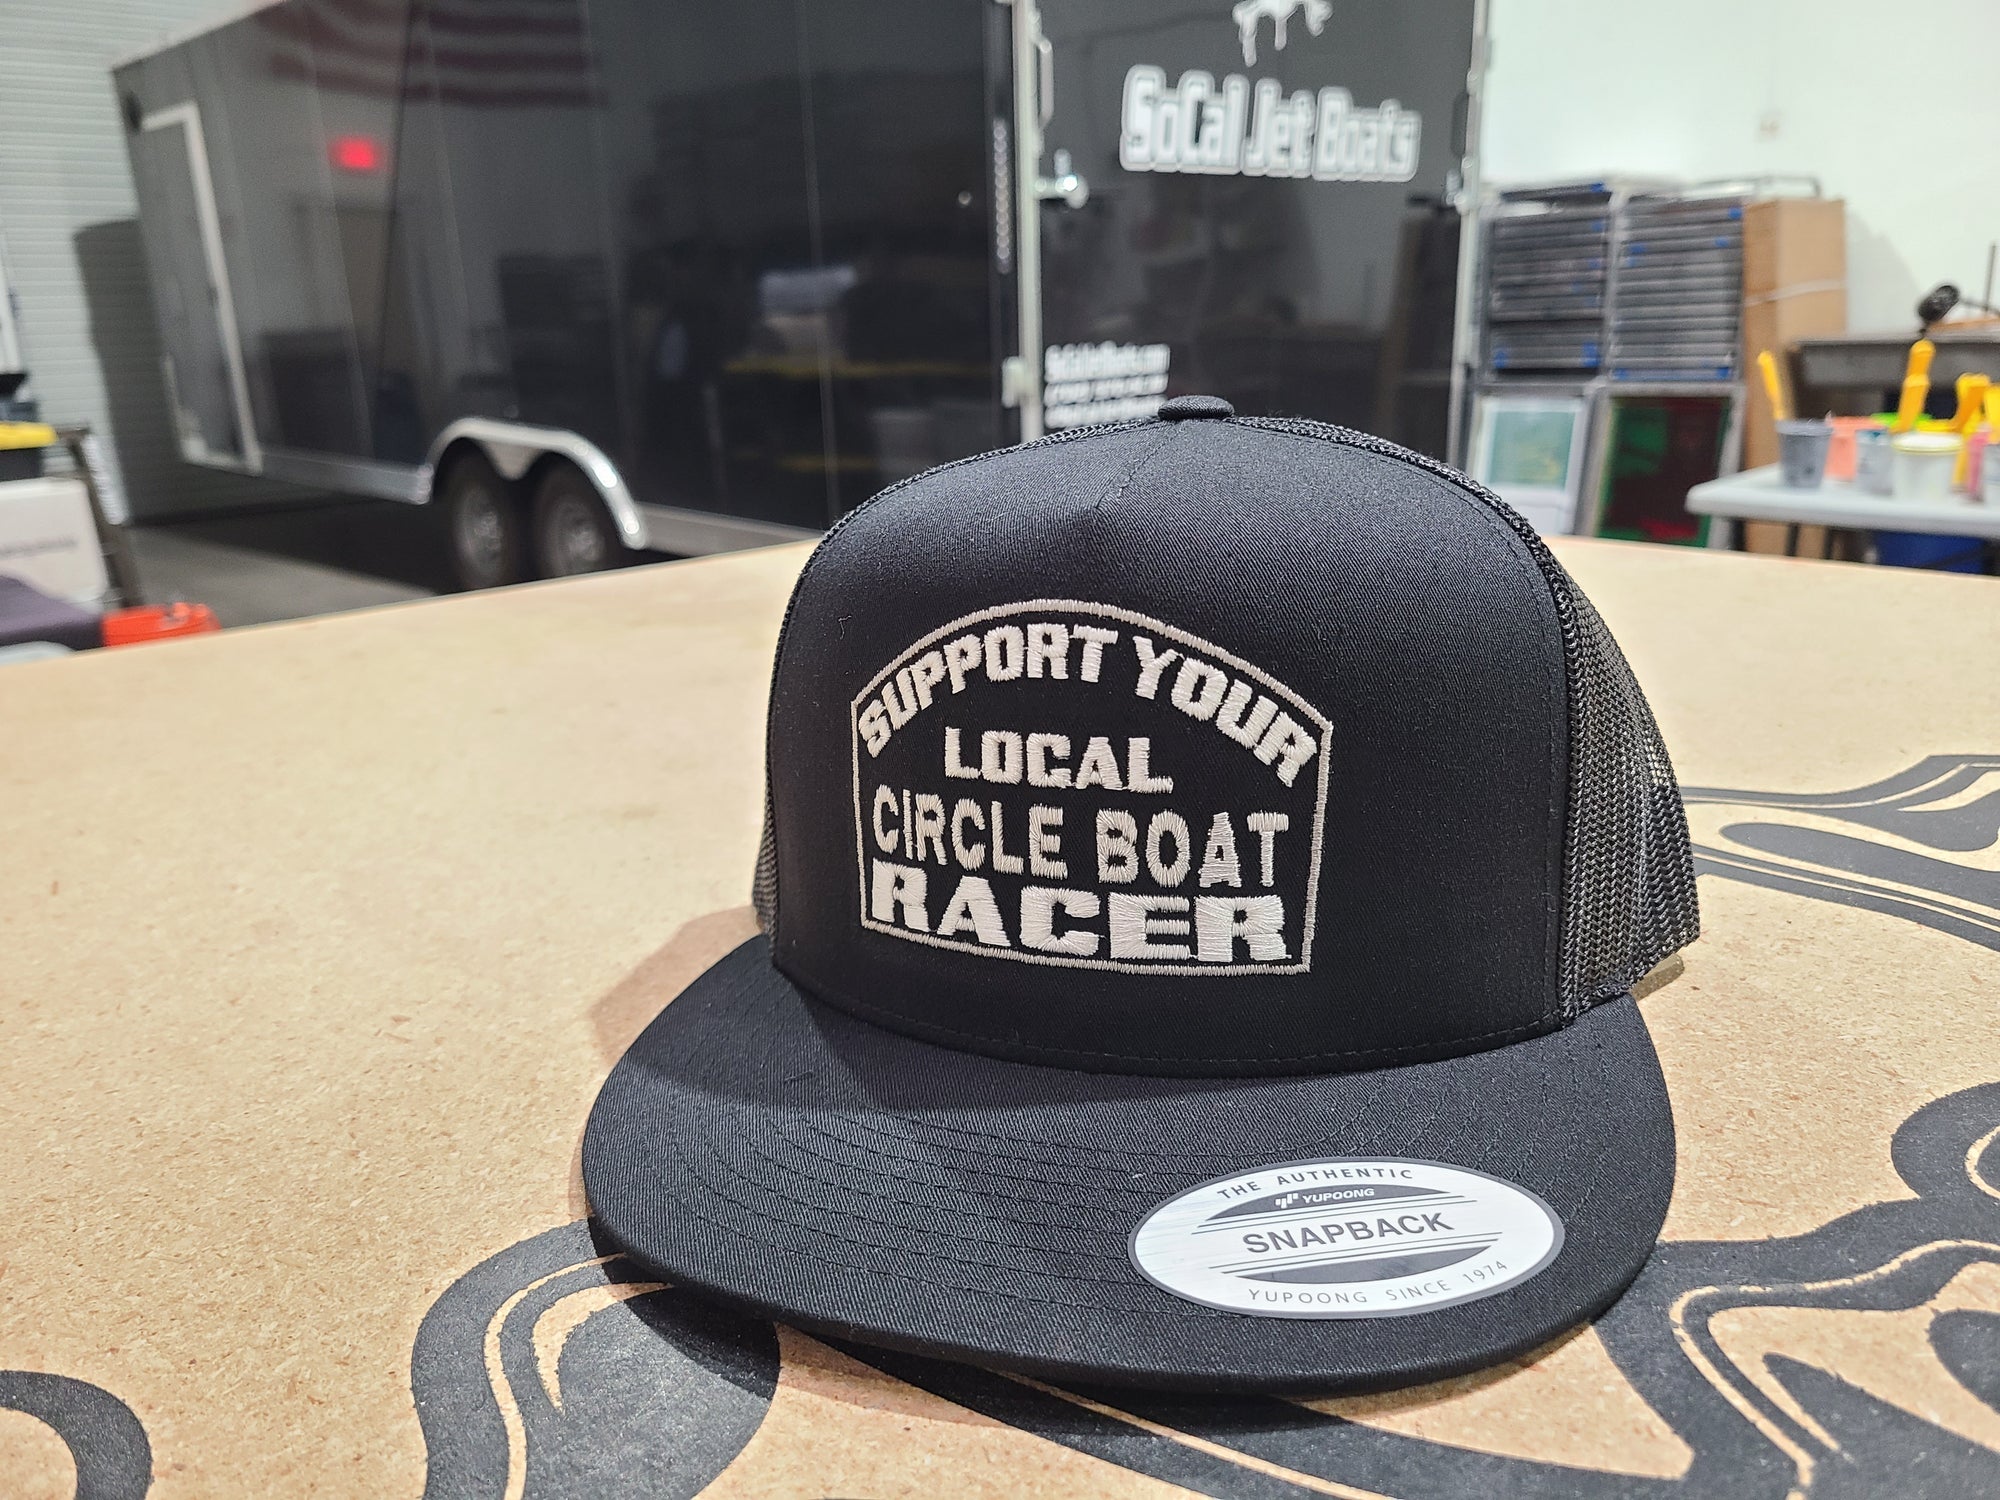 Support Your Local Circle Boat Racer - Snapback Trucker Hat